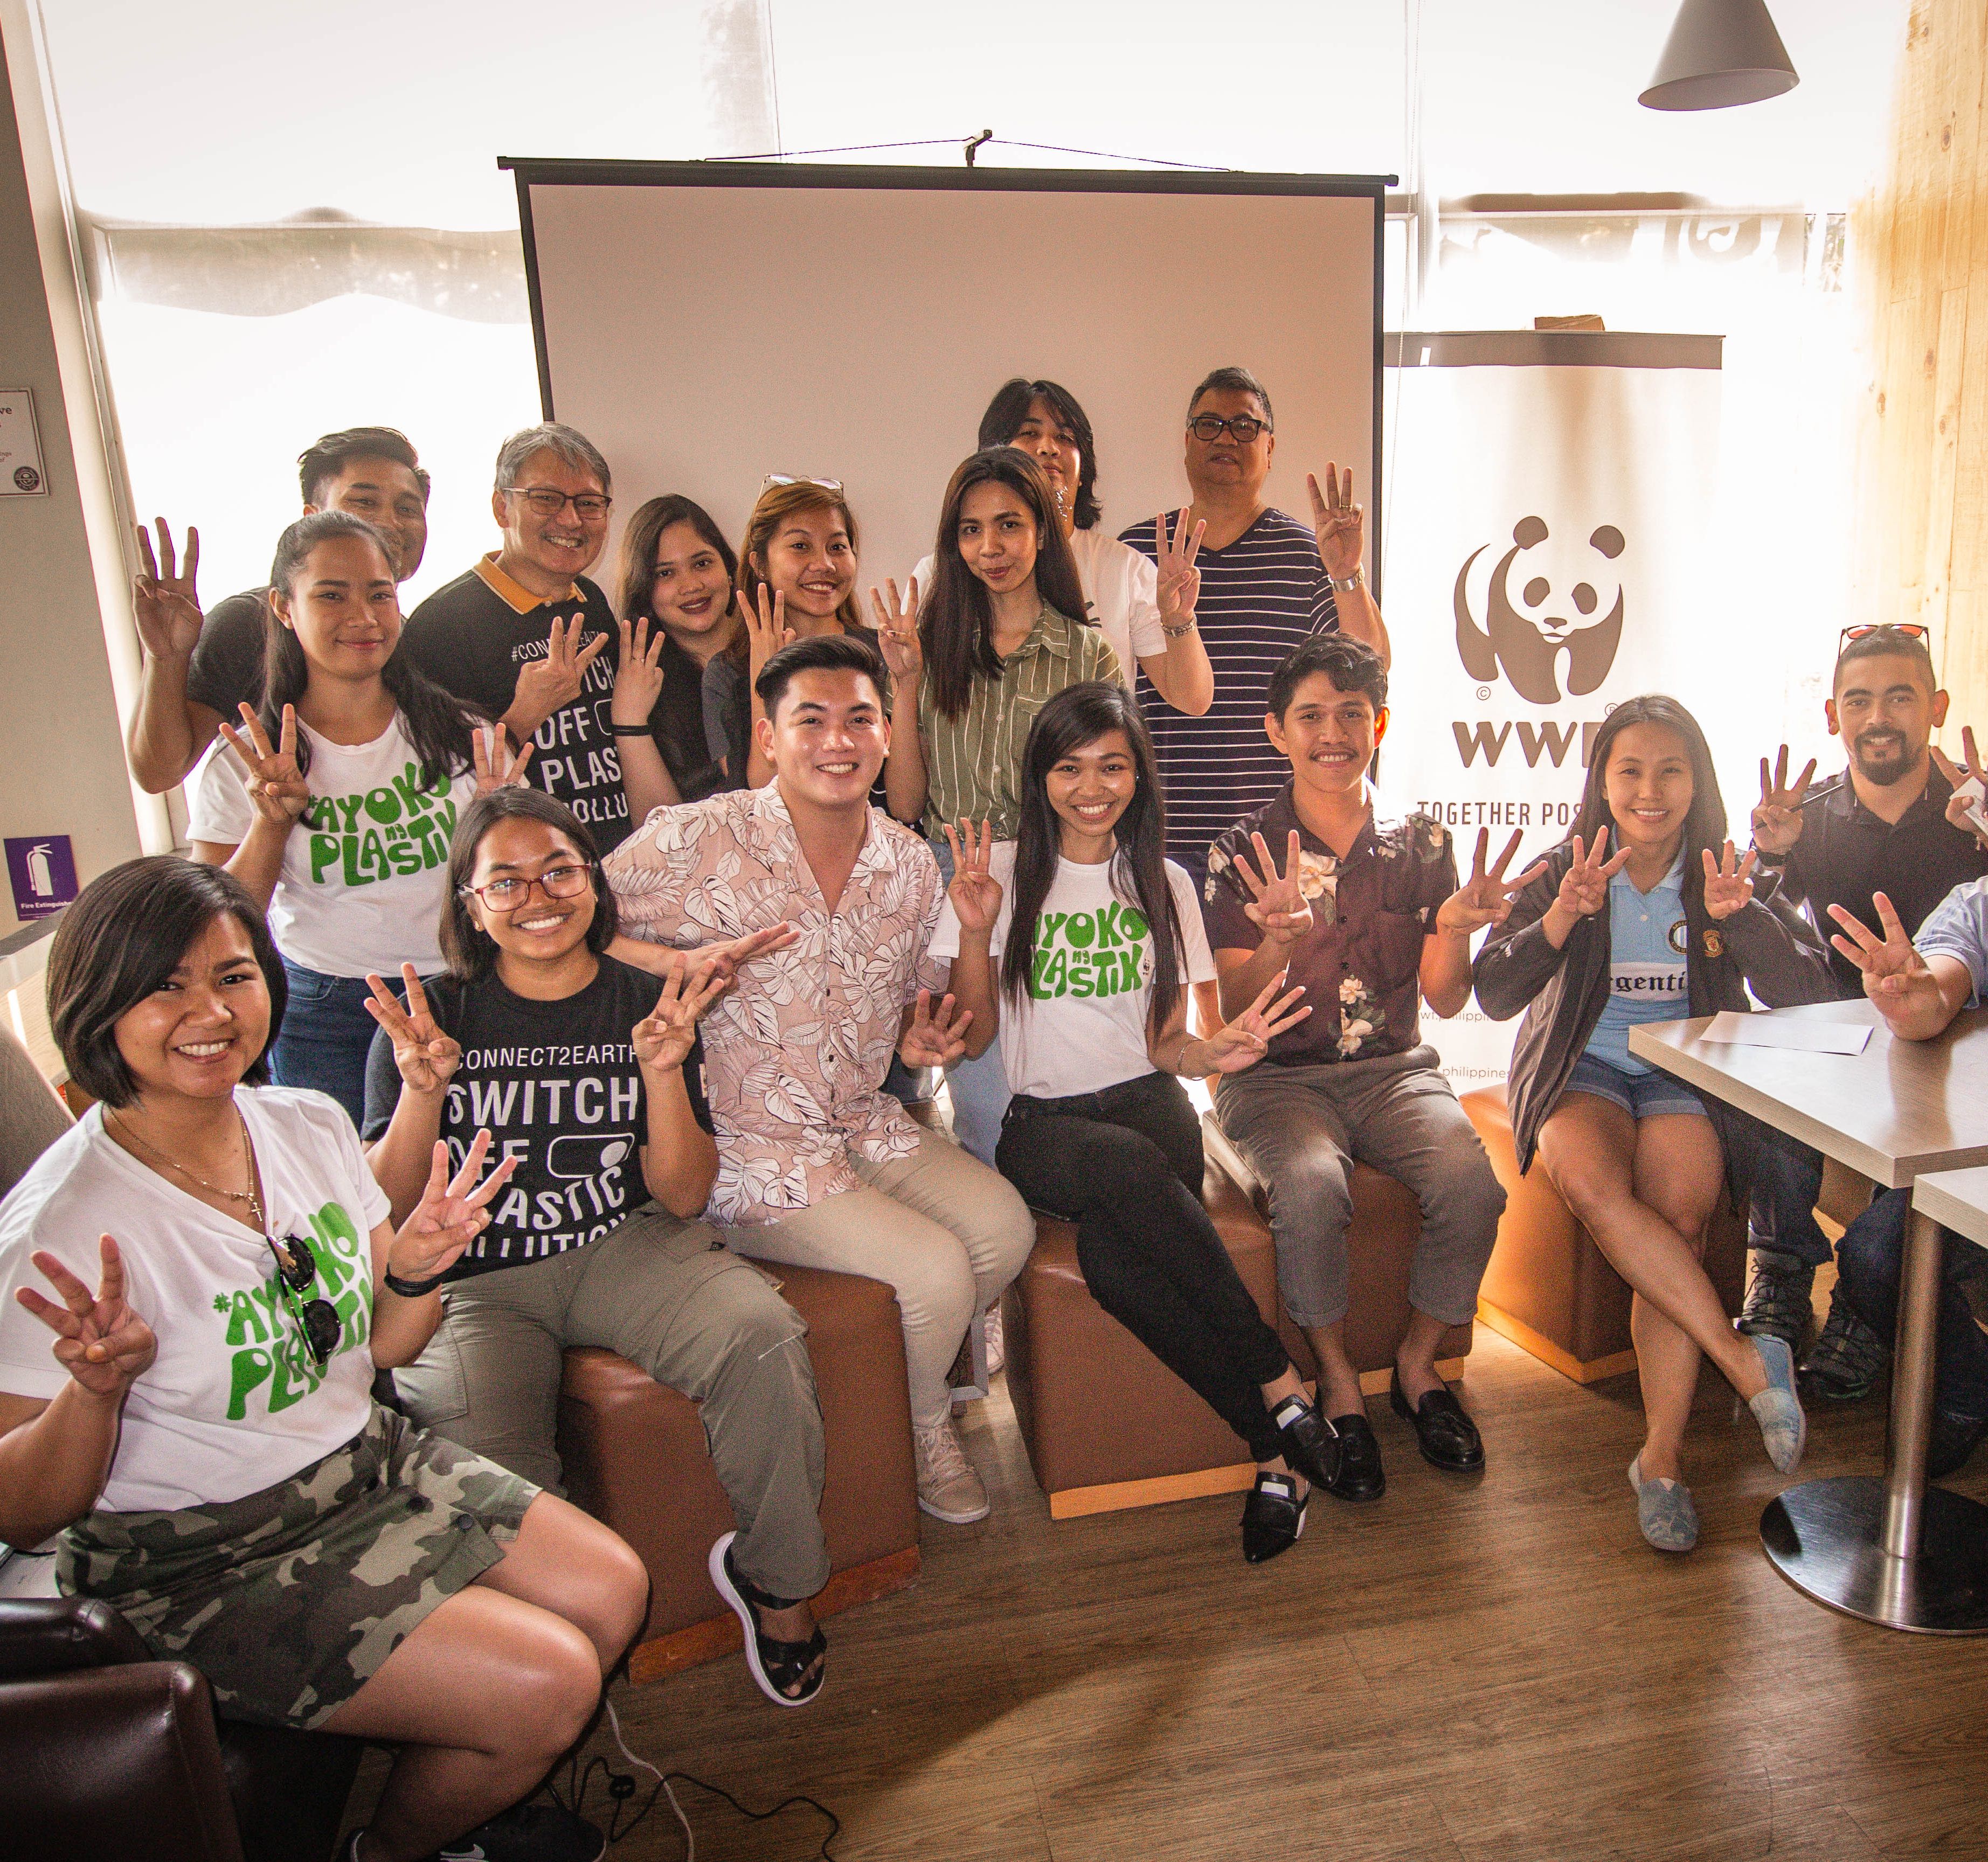 <h1>Conservation Conversation: The No Plastics in Nature Initiative</h1>
<p>On the 13th of July, 2019, staff and supporters of the World Wide Fund for Nature (WWF) Philippines came together </p>
<p style="text-align: right;"><a href="https://support.wwf.org.ph/resource-center/story-archives-2019/concon-no-plastics-in-nature-initiative/" target="_blank">Read More &gt;</a></p>